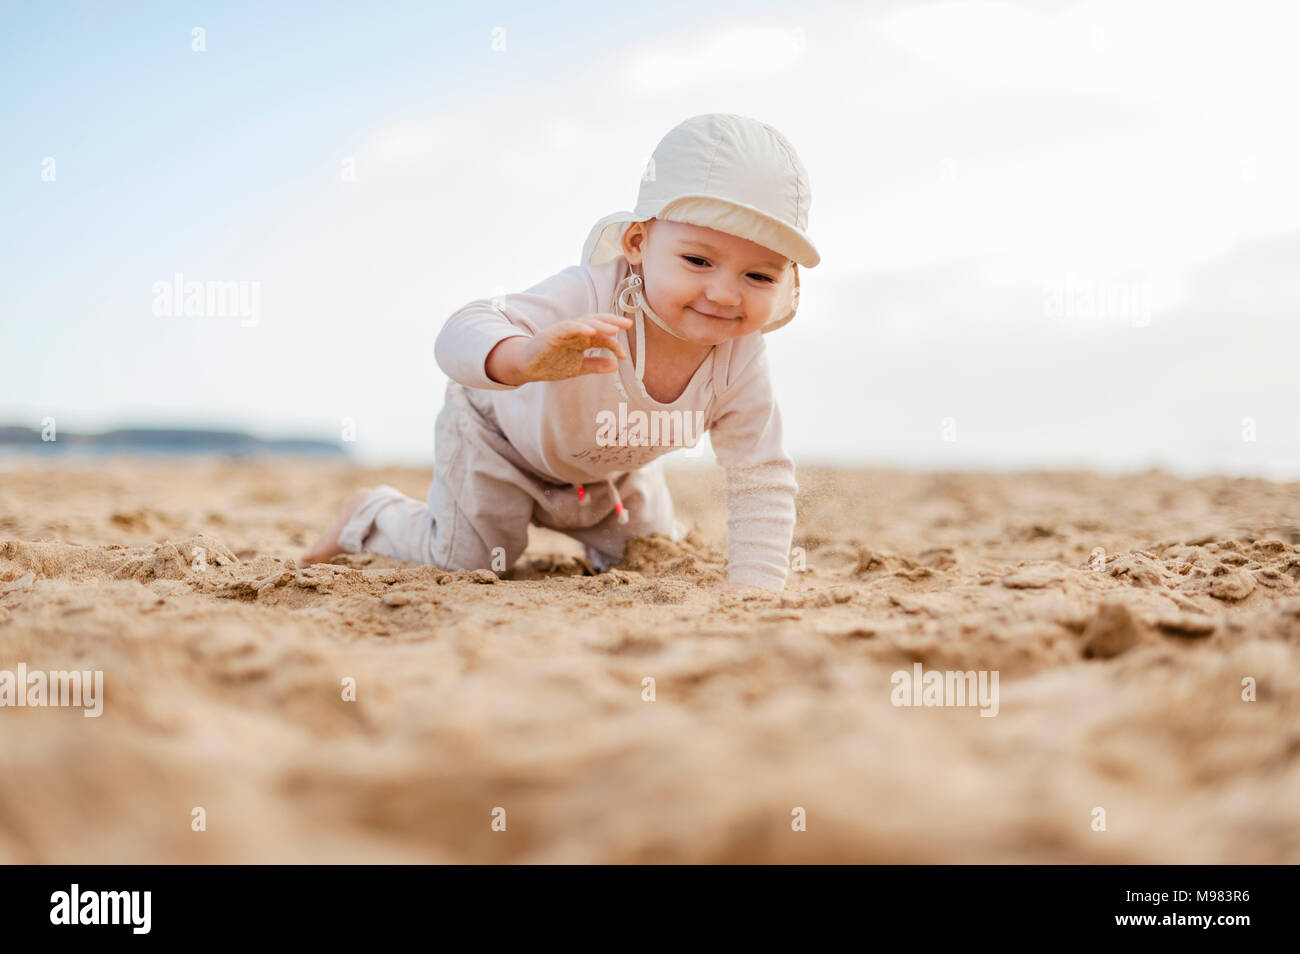 Spain, Lanzarote, baby girl crawling on the beach Stock Photo